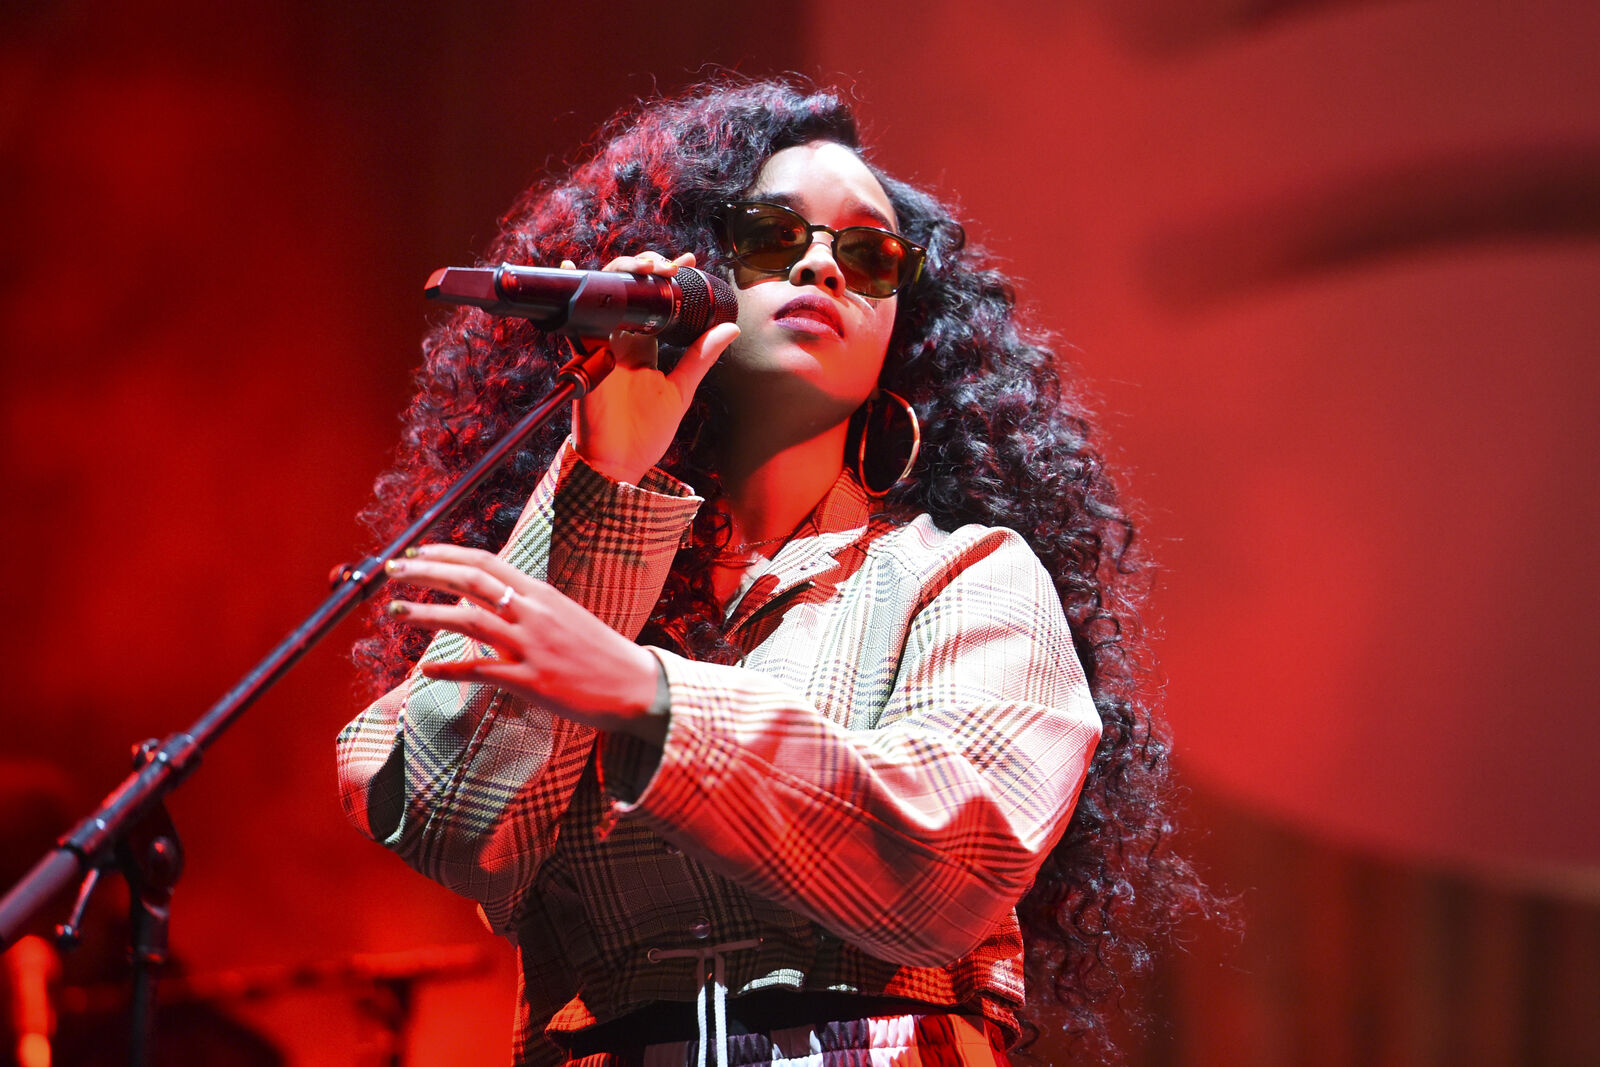 Rise to Fame: The H.E.R. Story